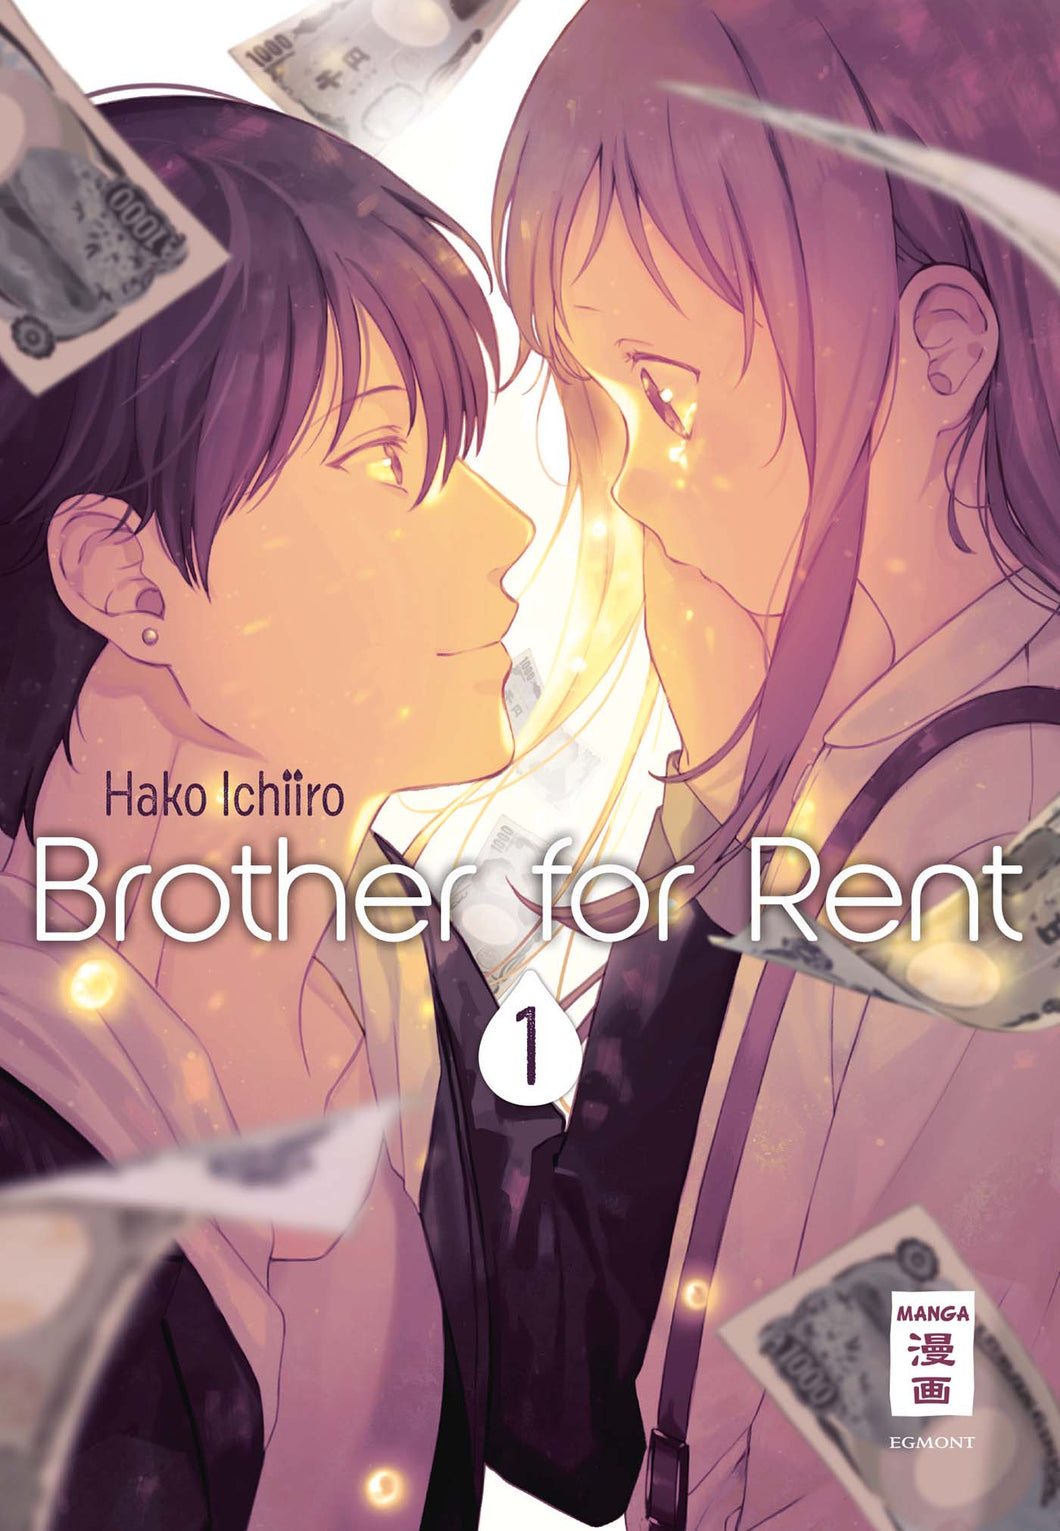 Brother for Rent